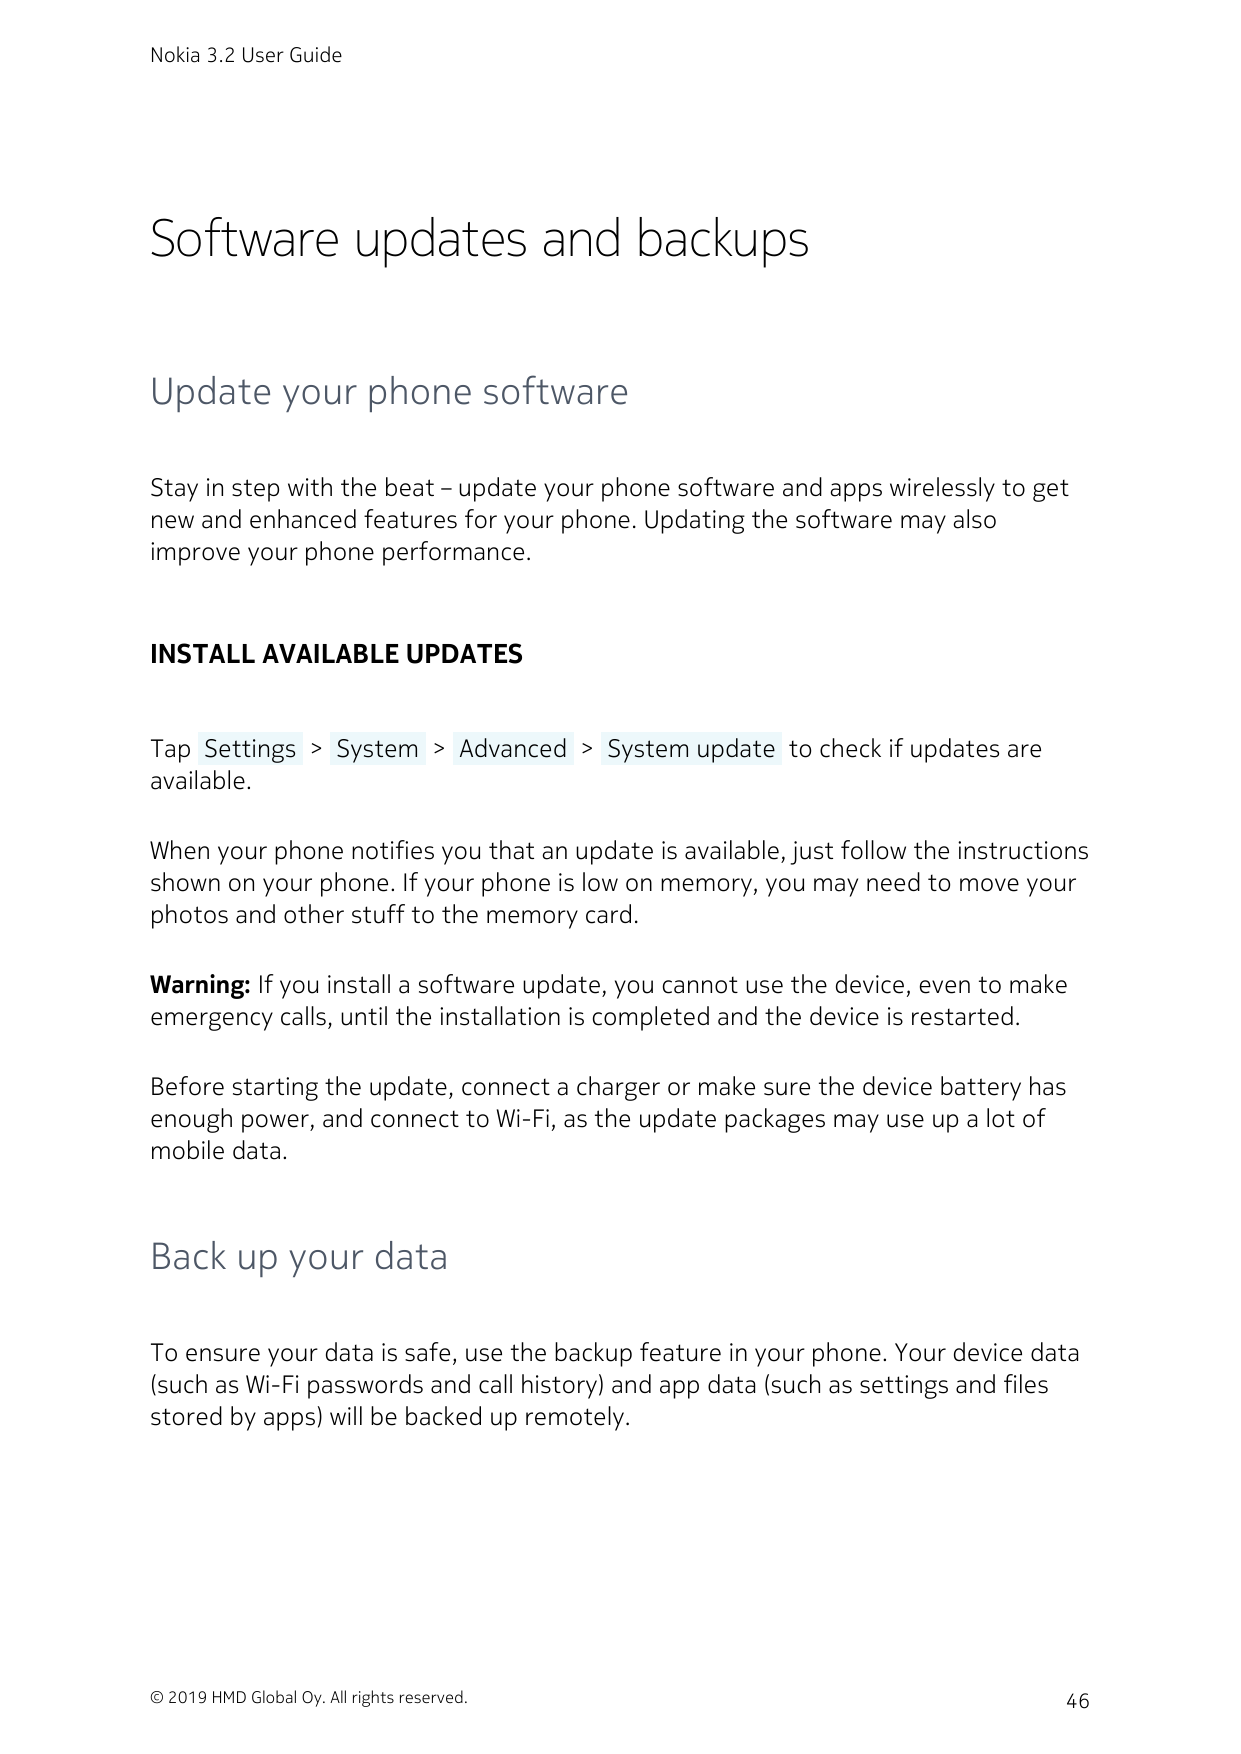 Nokia 3.2 User GuideSoftware updates and backupsUpdate your phone softwareStay in step with the beat – update your phone softwar